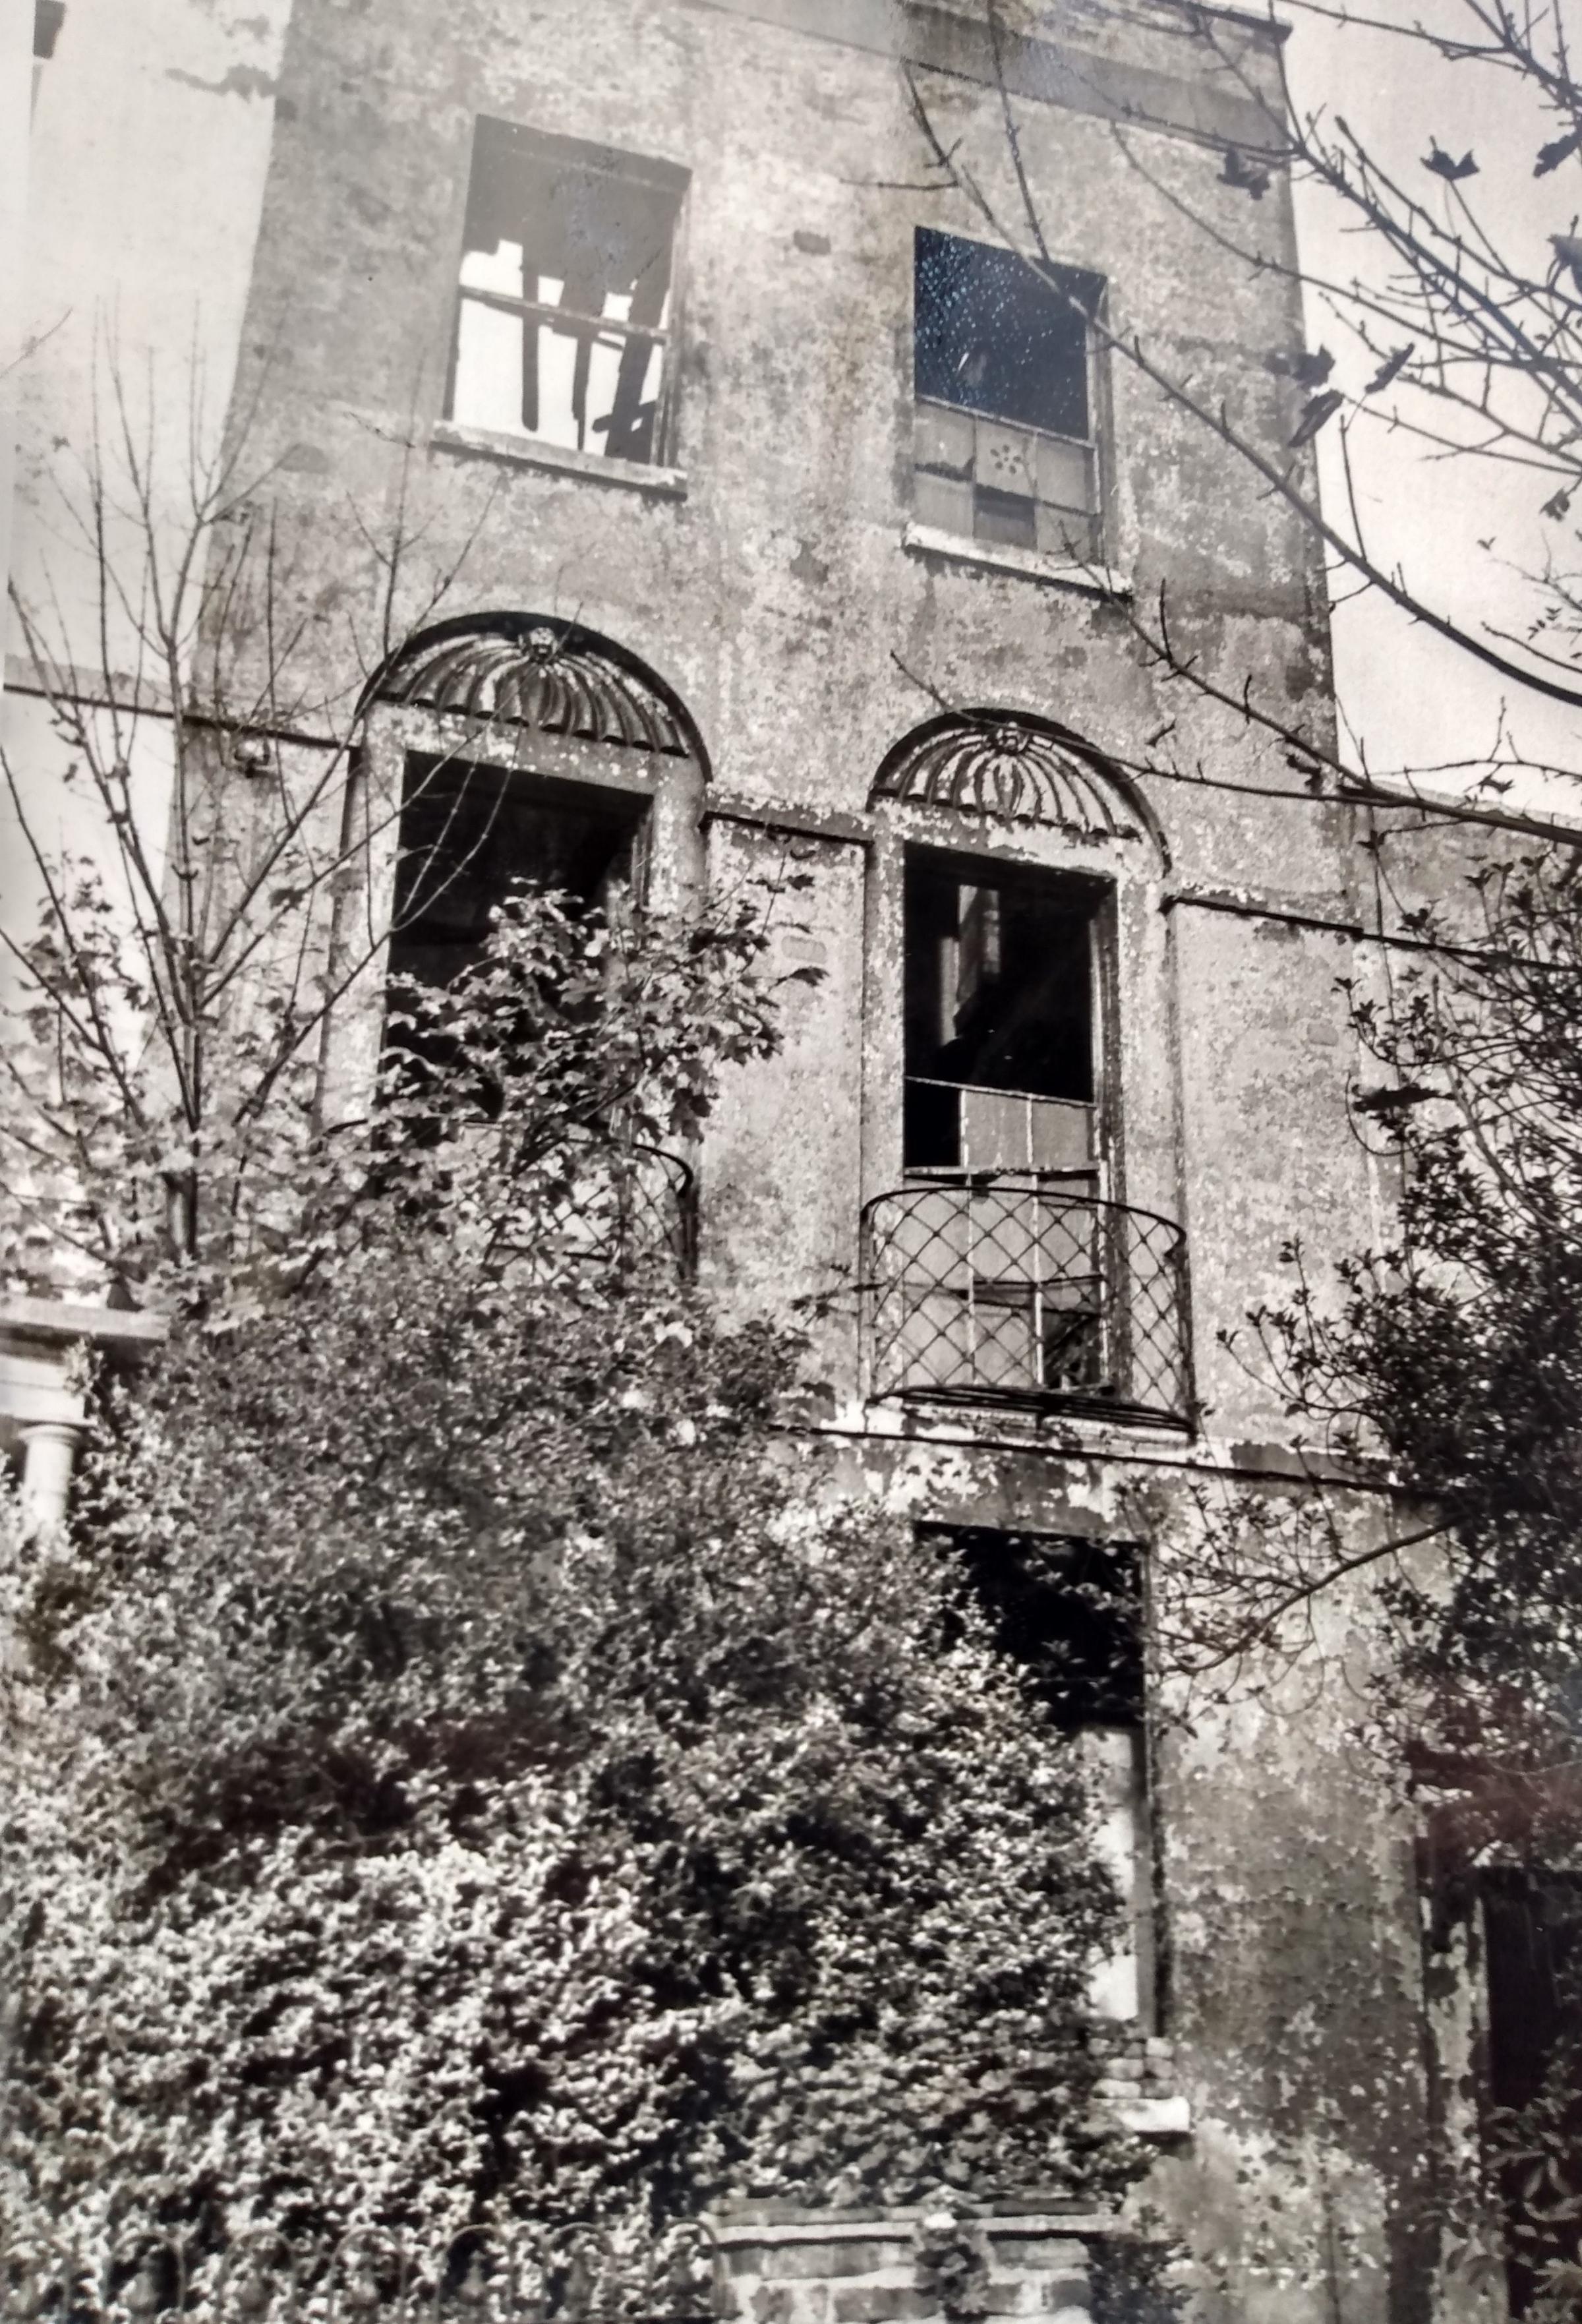 The derelict Regency building in Rainbow Hill Terrace as it stood in June 1976. It was restored some years later